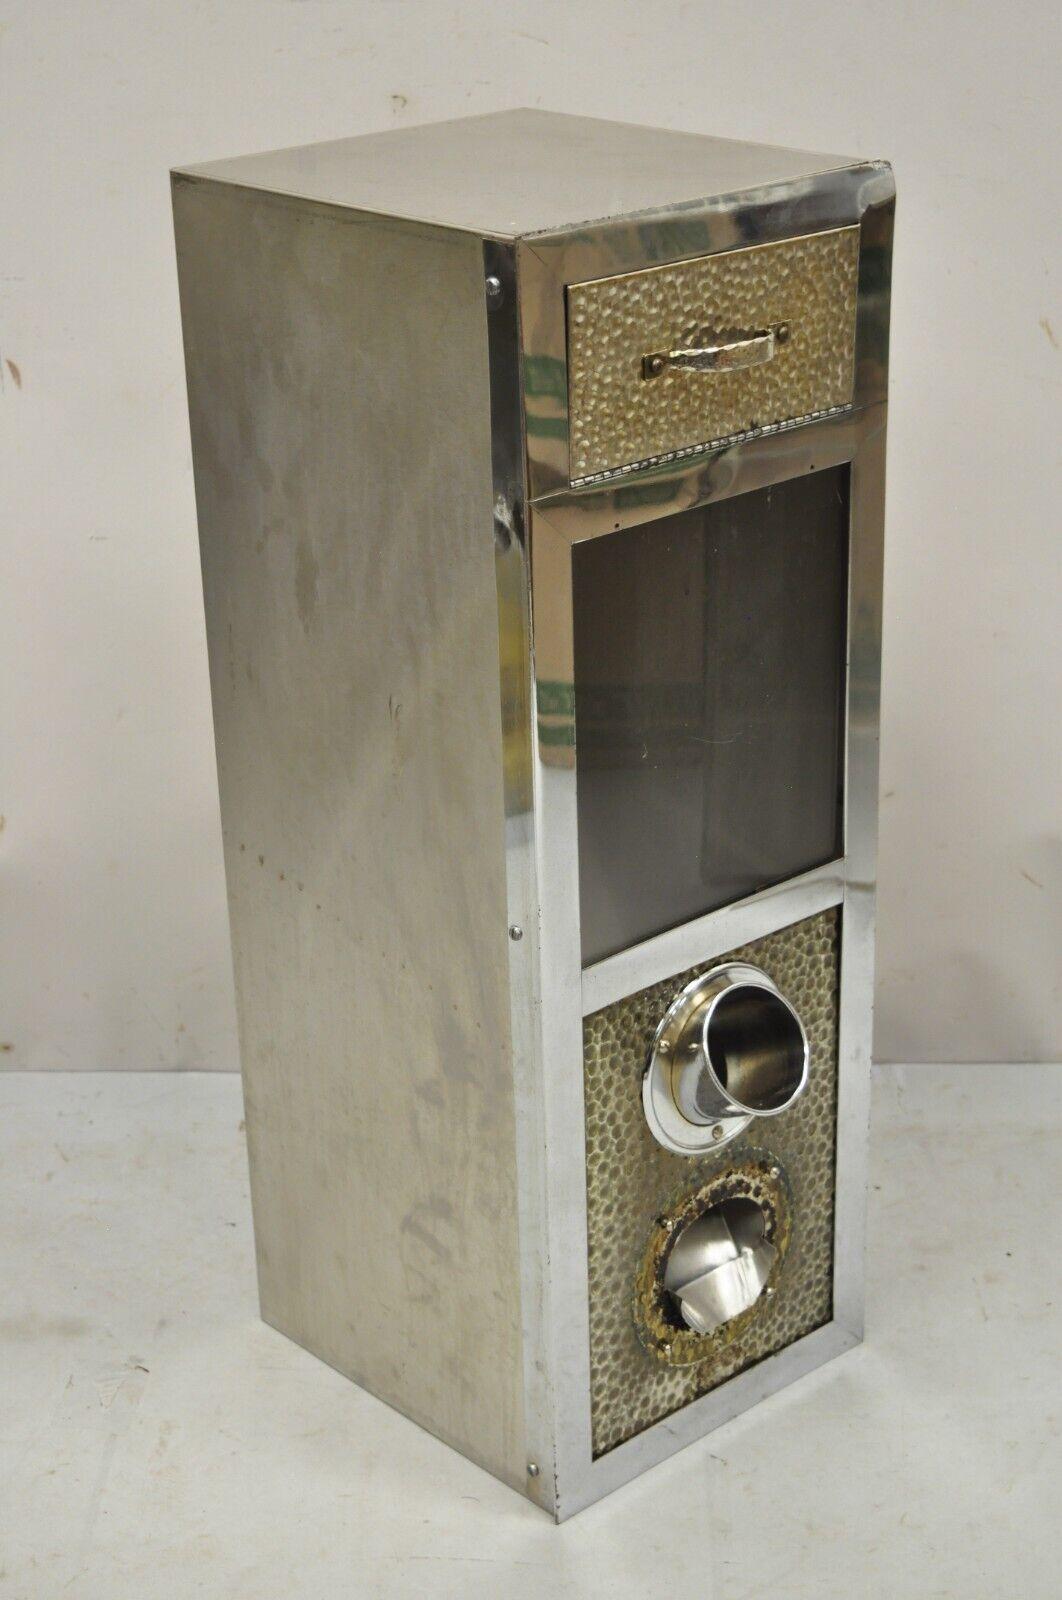 Vintage stainless steel industrial restaurant coffee bean storage dispenser. *Price is per dispenser. Currently 2 available*. Item is believed to be an industrial restaurant coffee bean dispenser (this has not been confirmed and I don't know if they